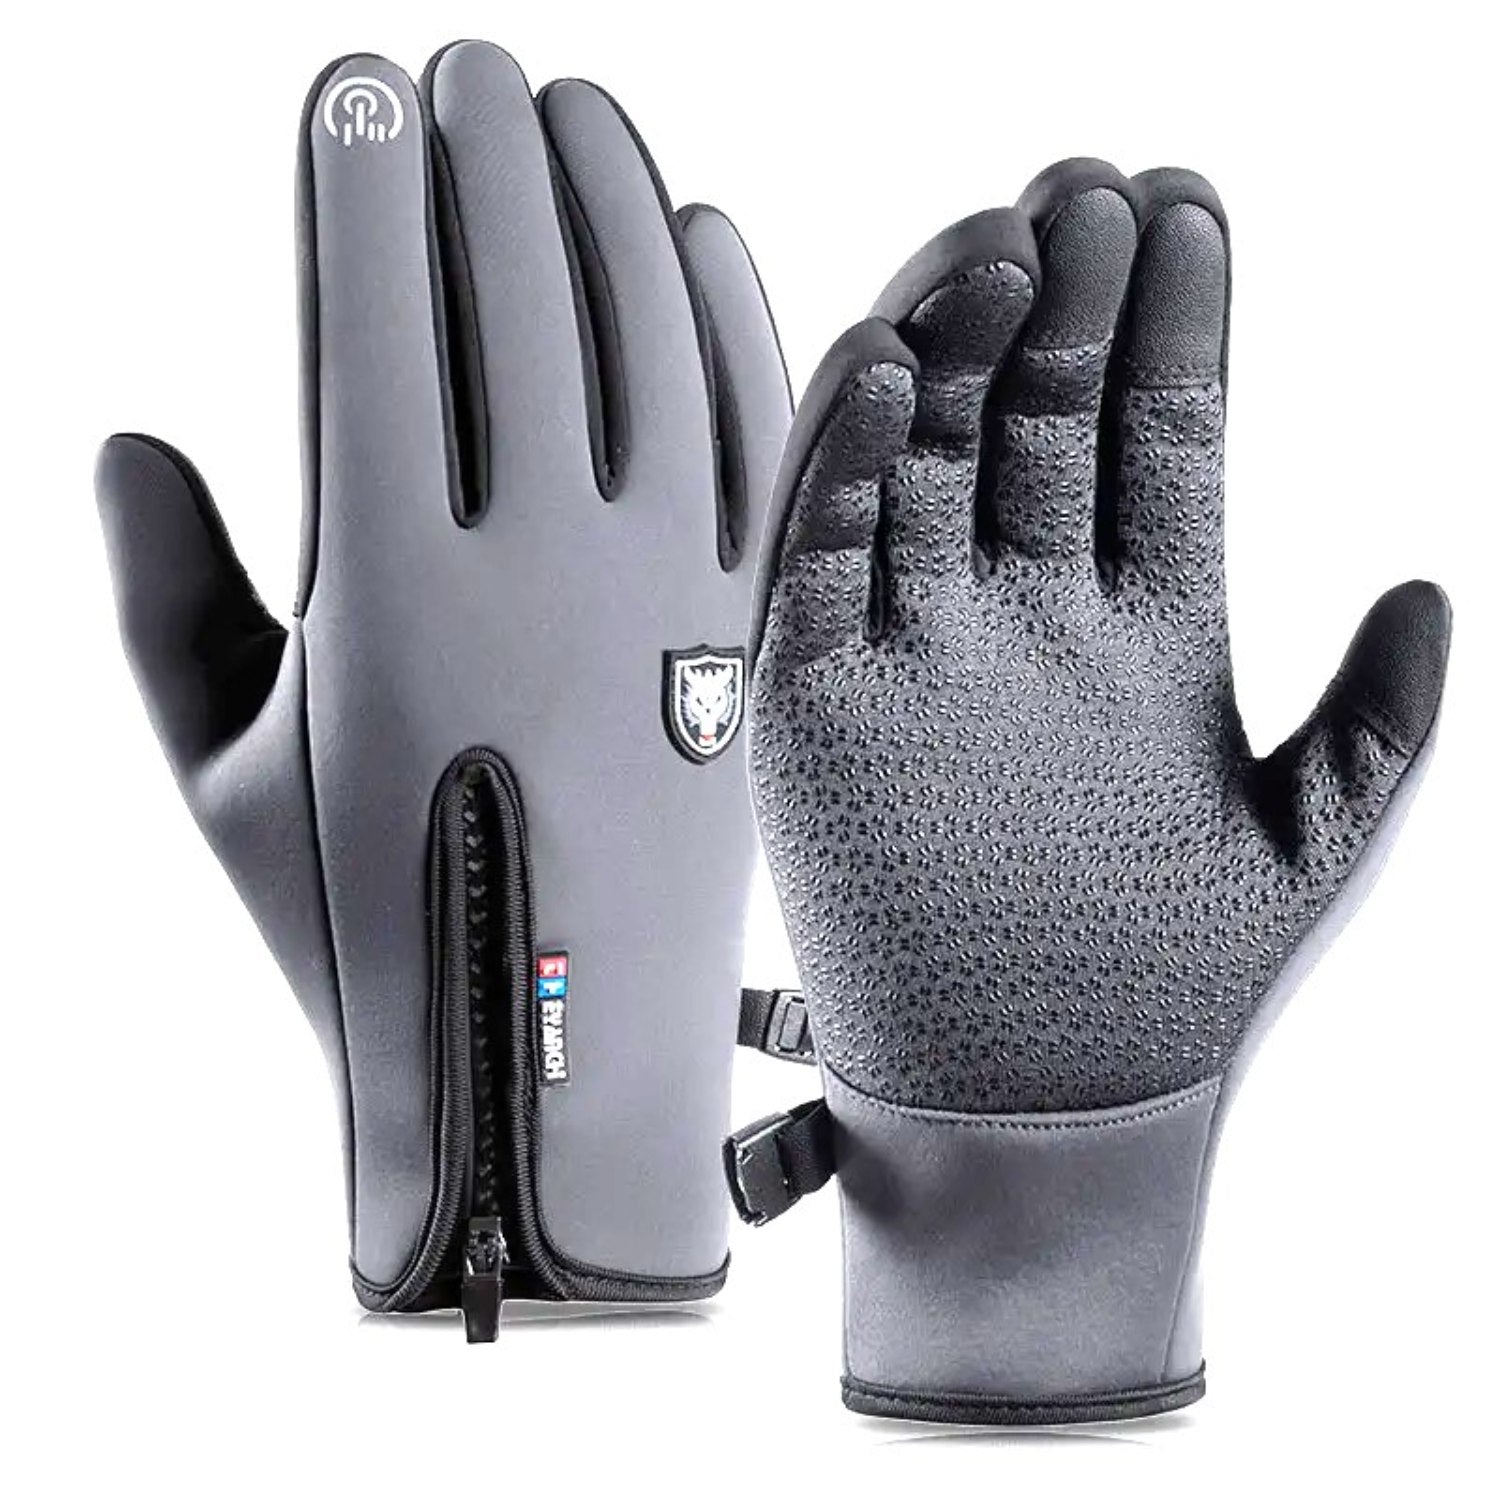 Buy Kaza Winter Windproof Gloves with Zipper Grey at Gokyo Outdoor Clothing & Gear